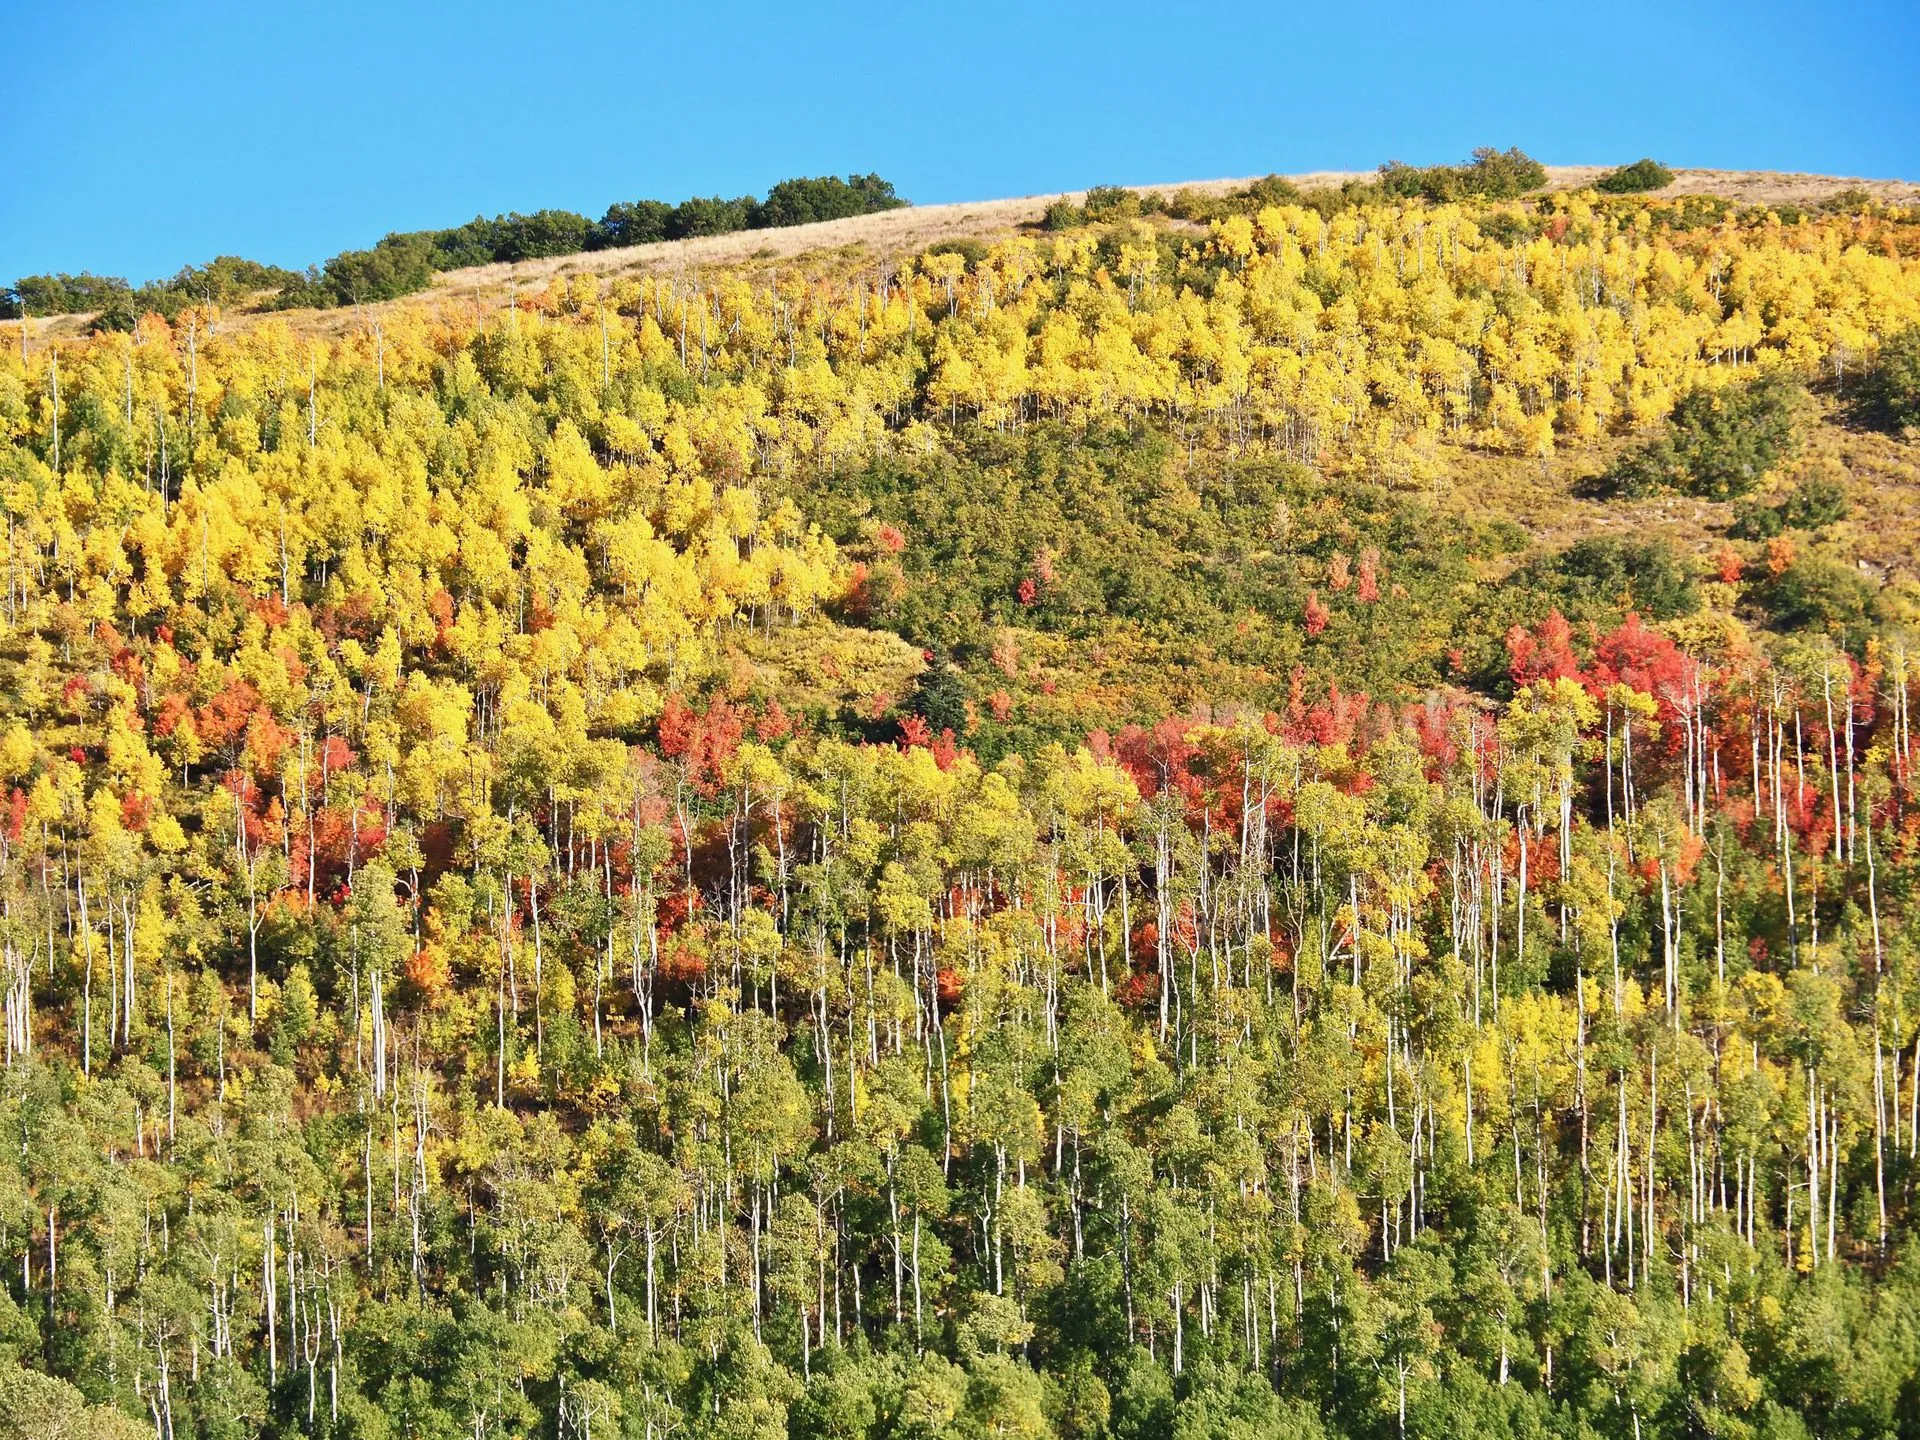 A field of aspen trees showing off their fall colors